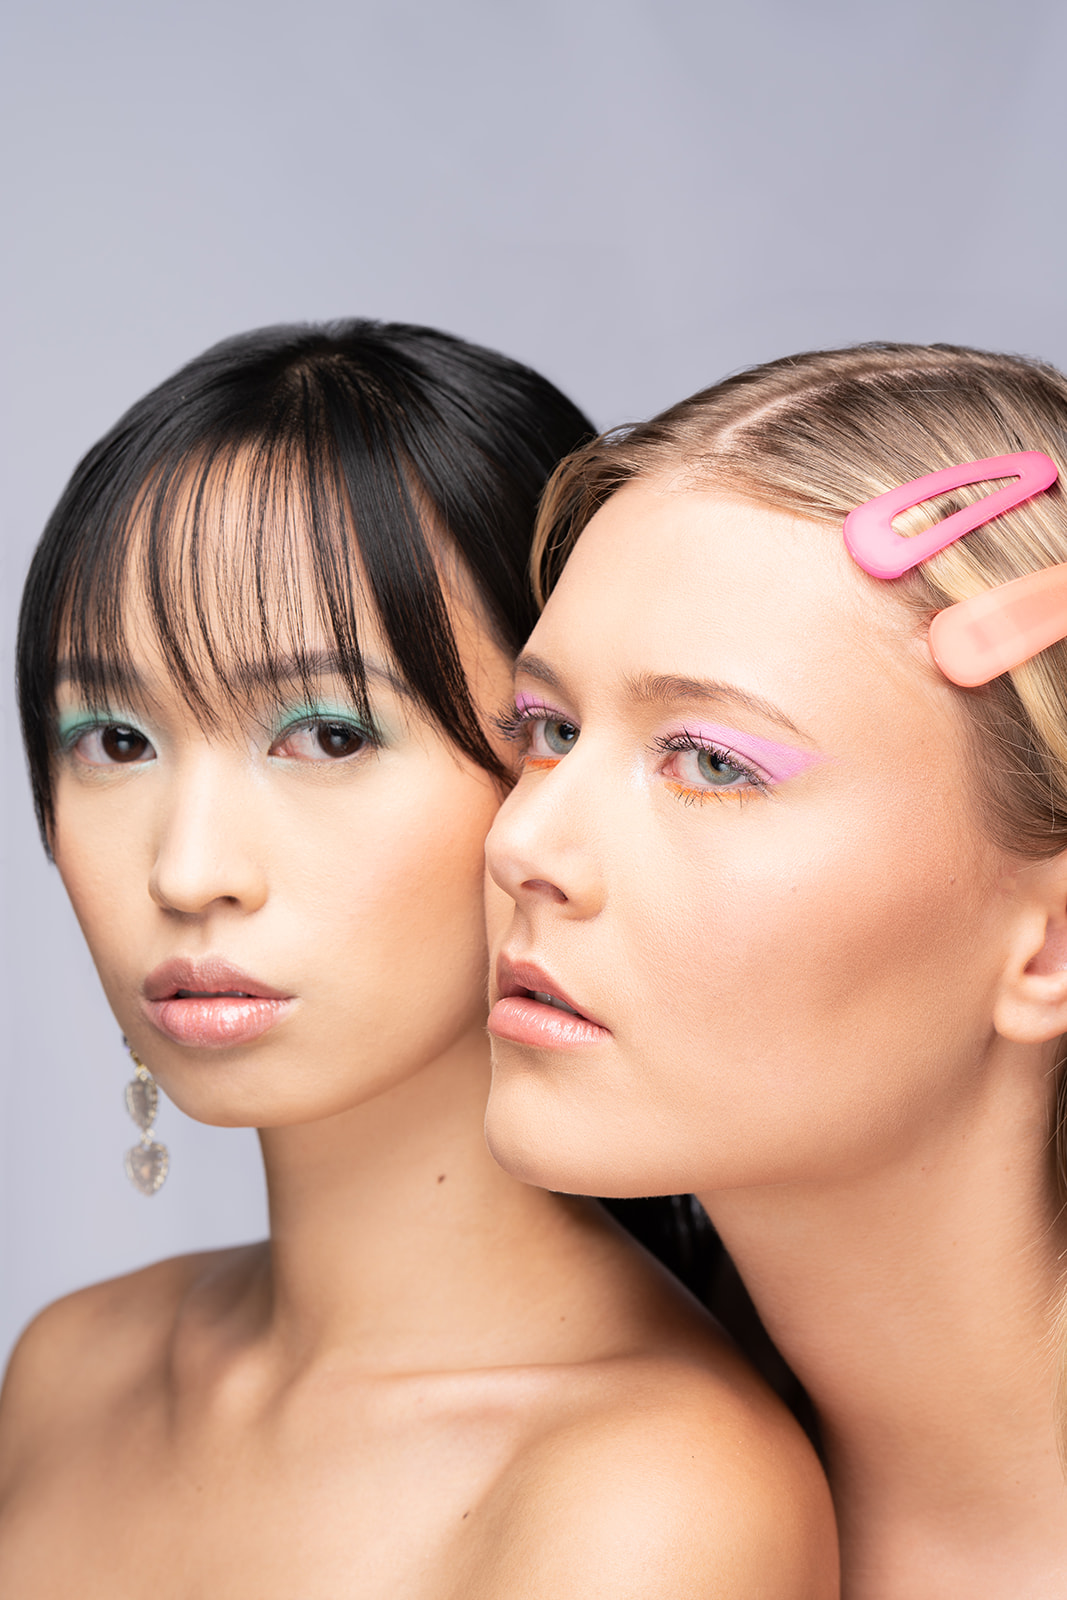 Alyssa and Mei-lin from Heyman Talent and John Gregory from Aesthetic Agency made this pastel-inspired beauty editorial come to life